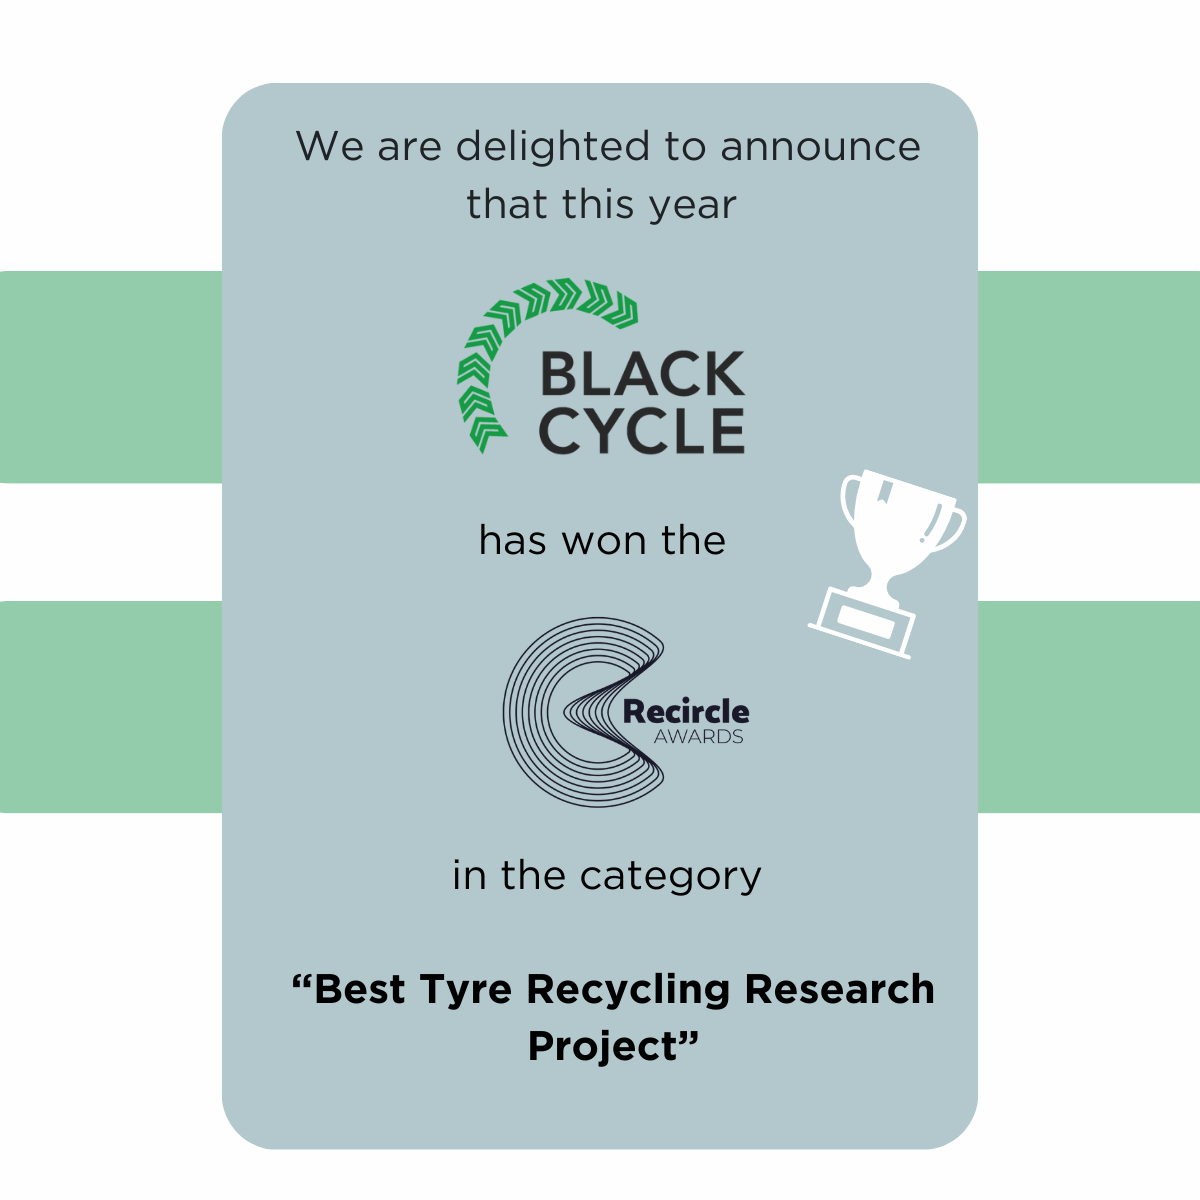 Distinction for the European BlackCycle research project